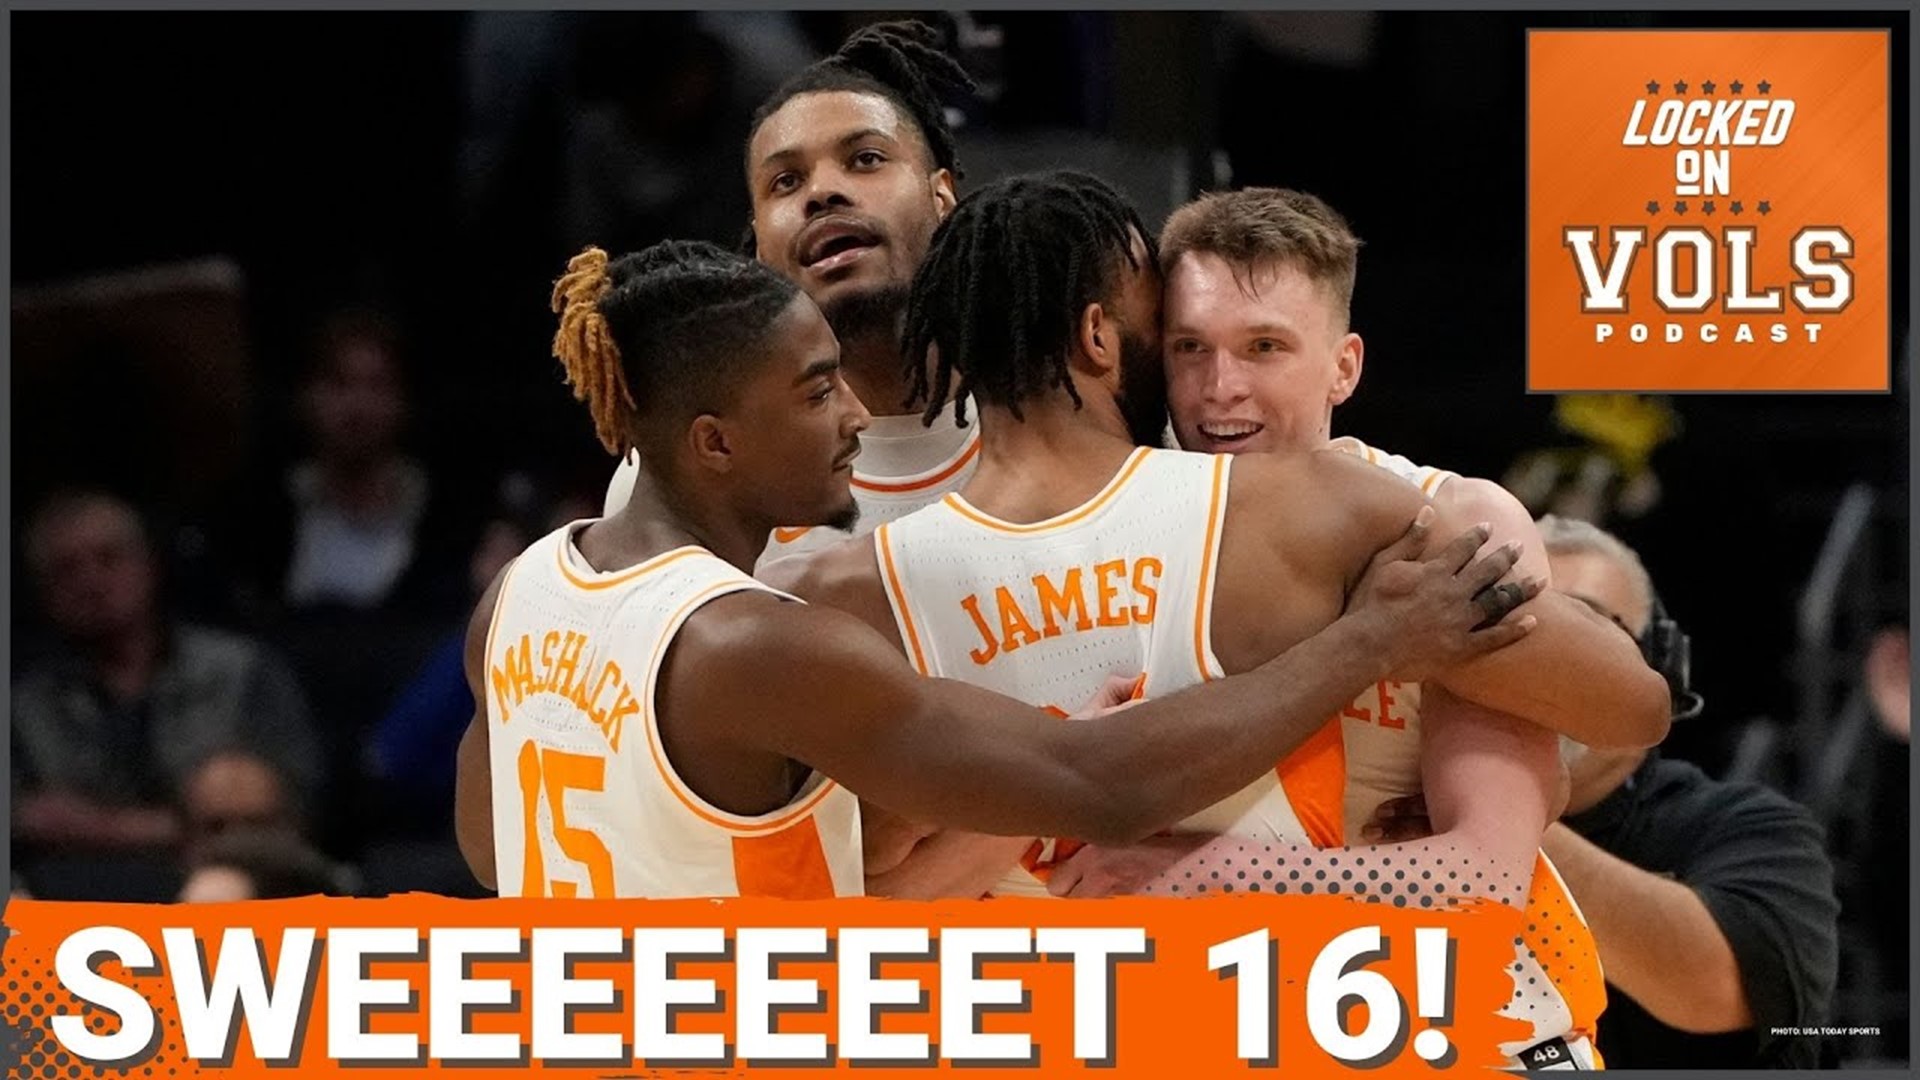 Sweet 16! Tennessee, Dalton Knecht beat Texas in NCAA Tournament. Rick Barnes back to Sweet 16